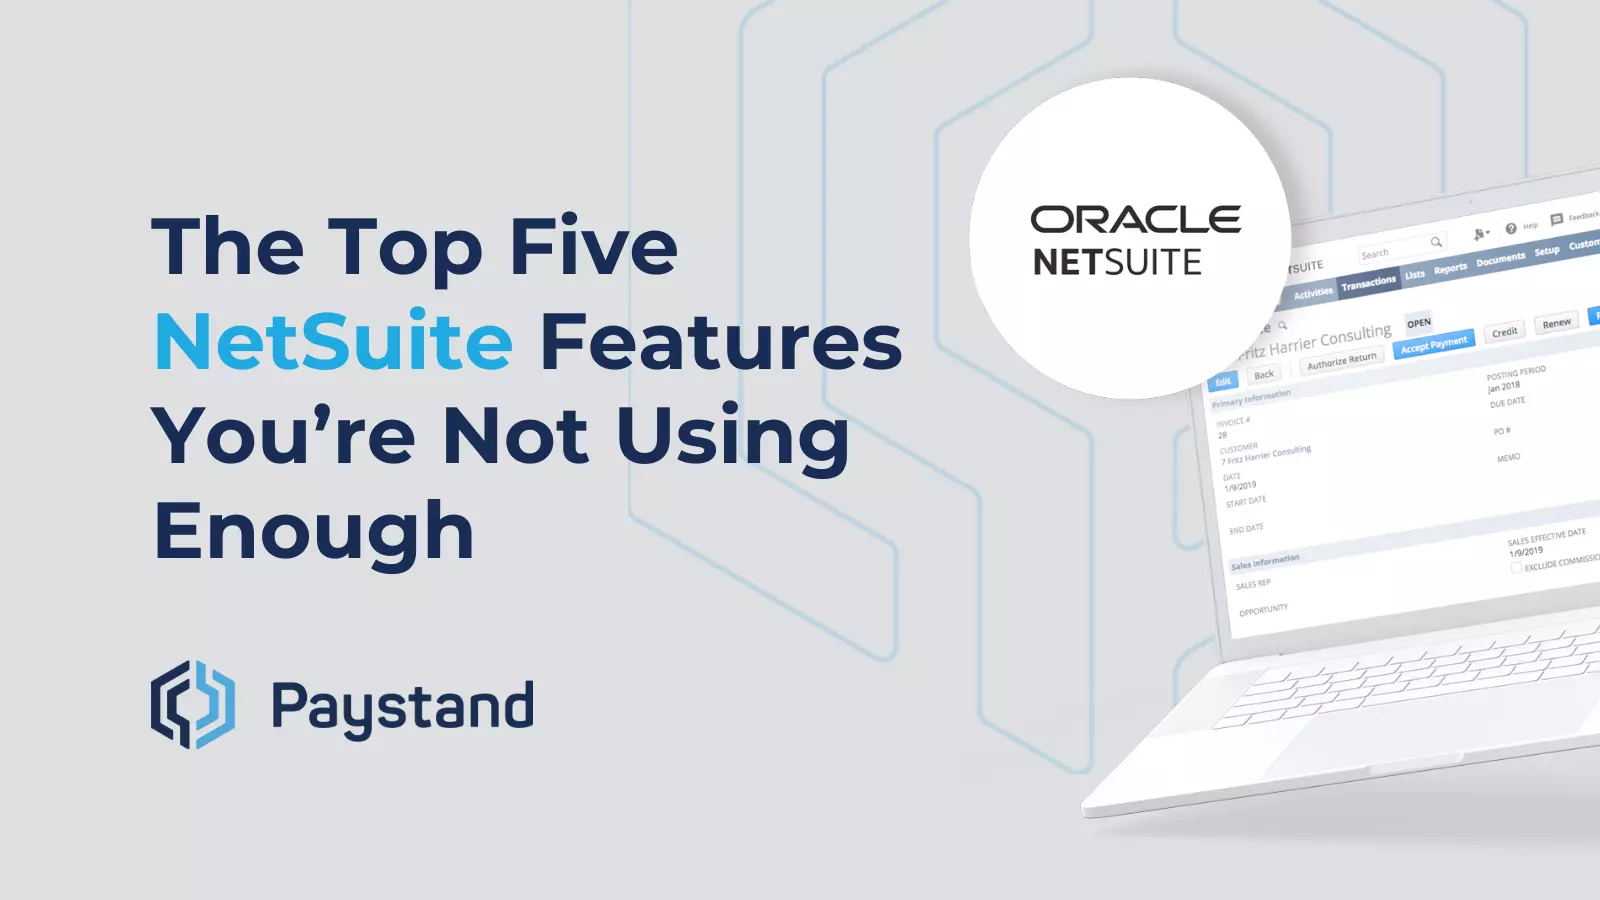 The Top Five NetSuite Features You’re Not Using Enough